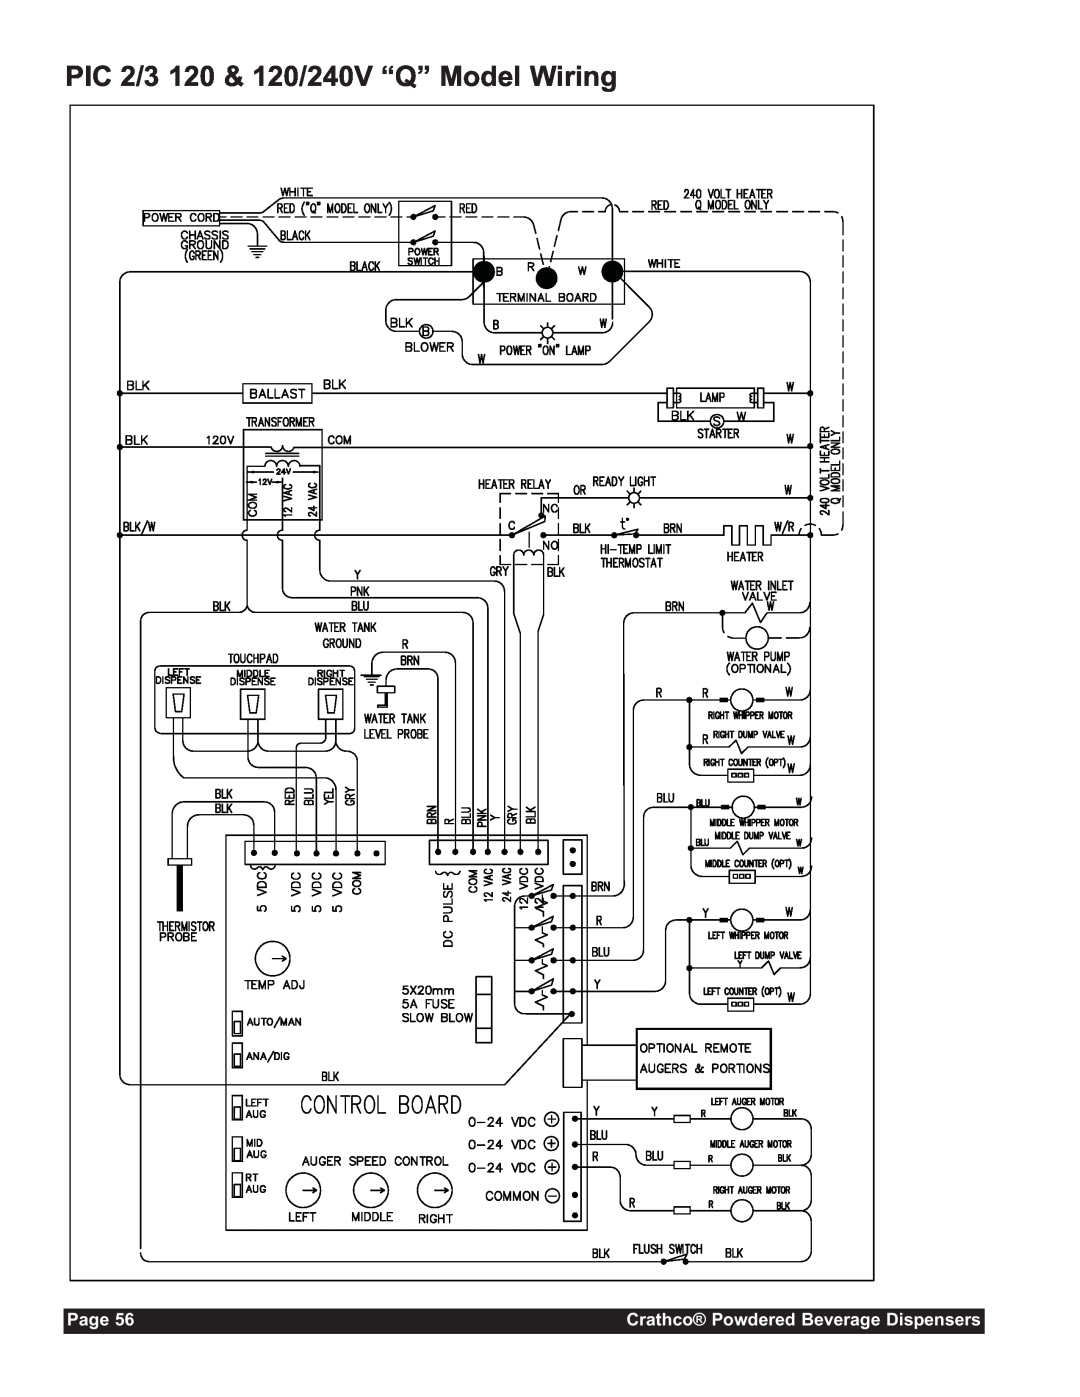 Grindmaster CC-302-20 service manual PIC 2/3 120 & 120/240V “Q” Model Wiring, Page, Crathco Powdered Beverage Dispensers 